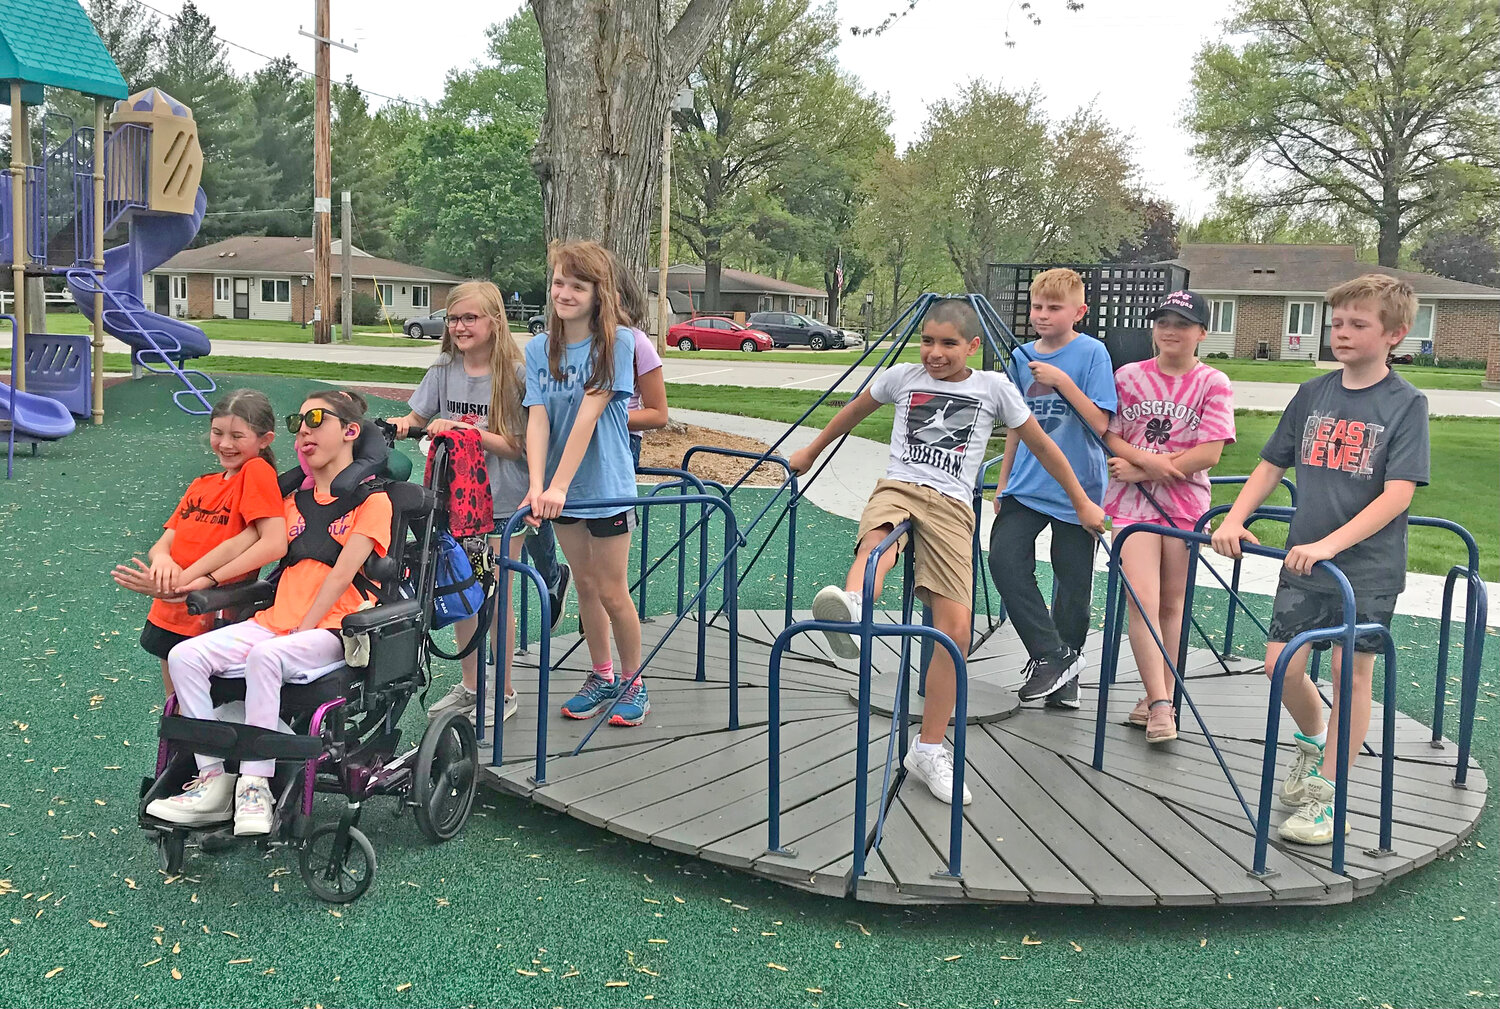 Railroad Park features newly renovated equipment and a soft surface, but also includes an ‘original’ merry-go-round installed earlier as an Eagle Scout project.